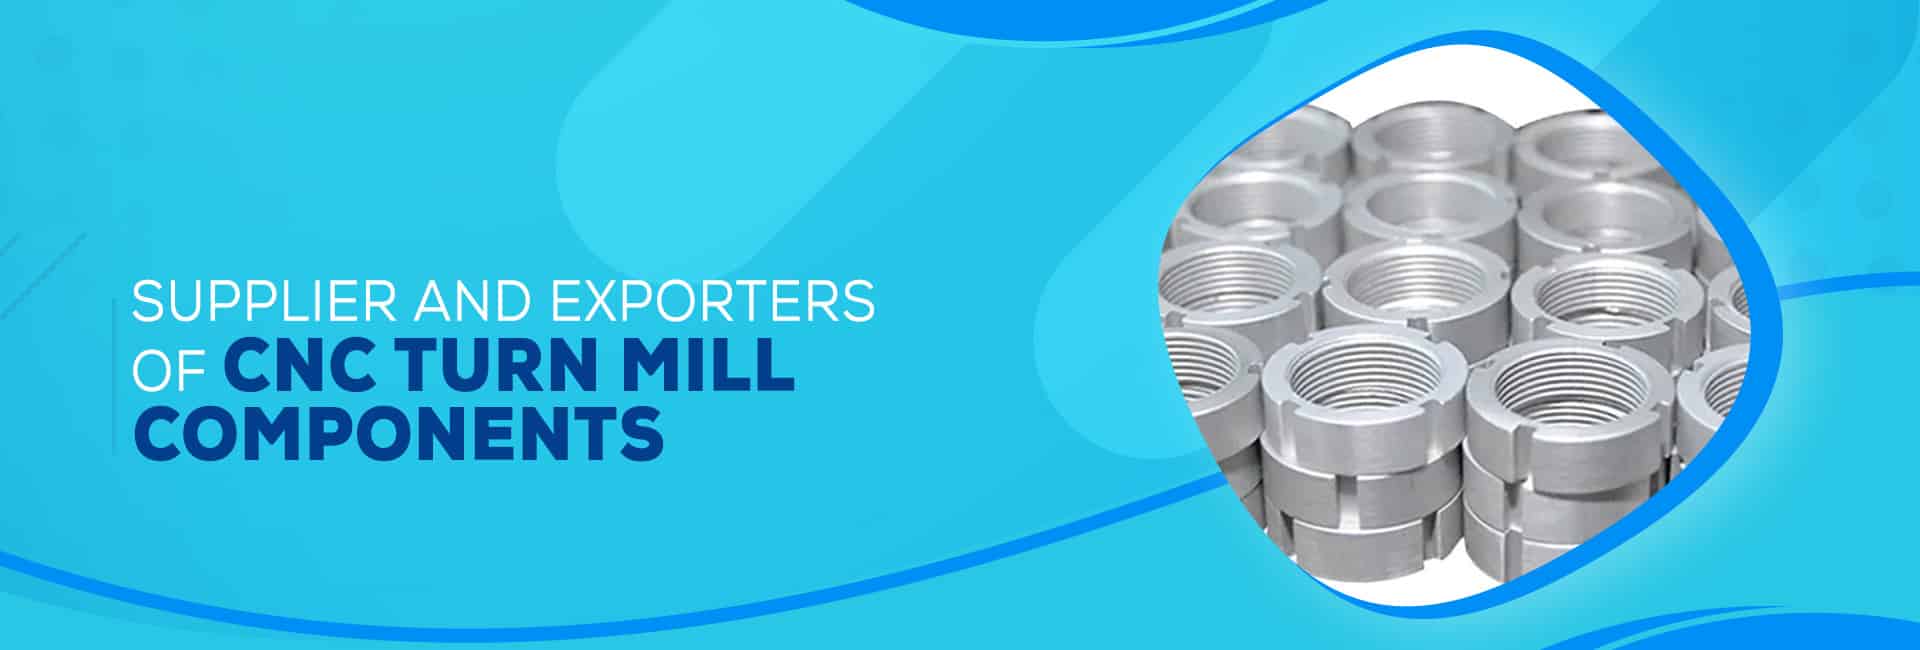 Supplier and Exporters of CNC Turn Mill Components